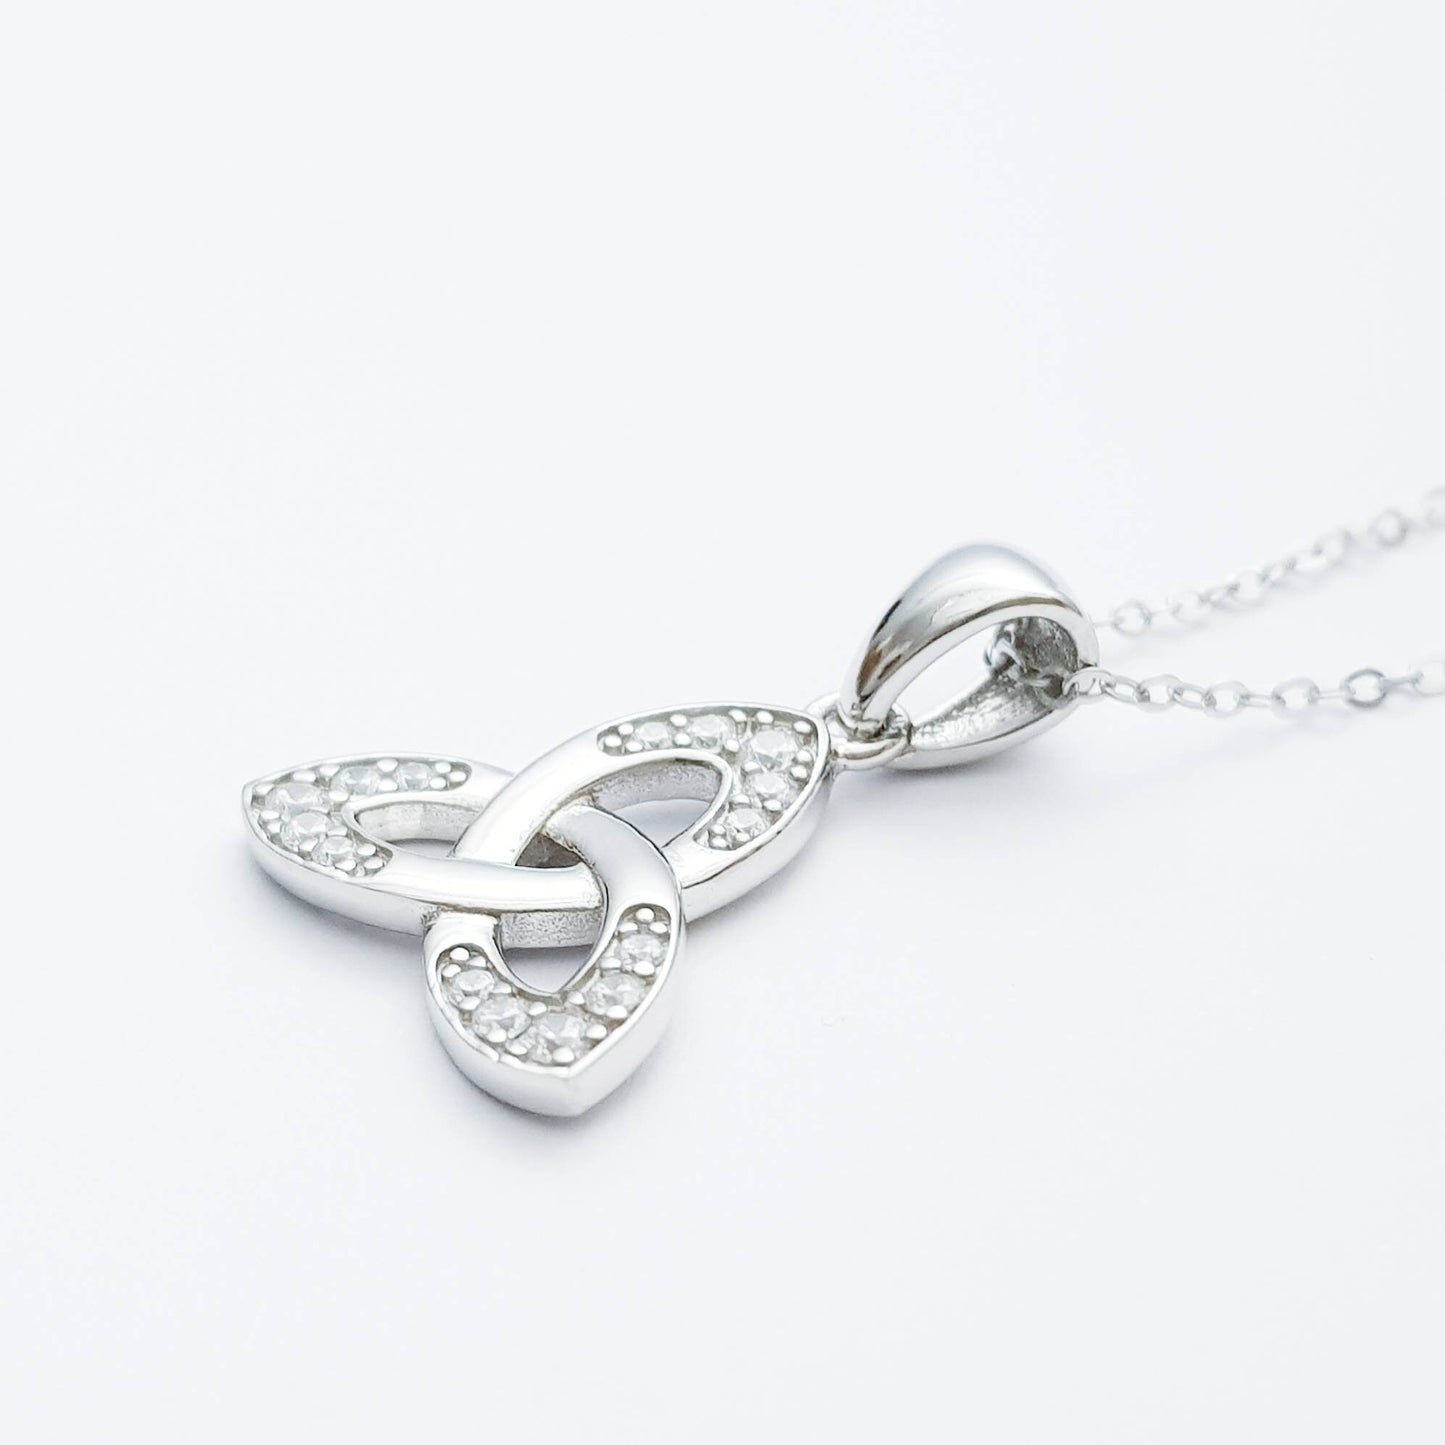 Celtic Trinity knot pendant, celtic triquetra necklace with angel wing chain